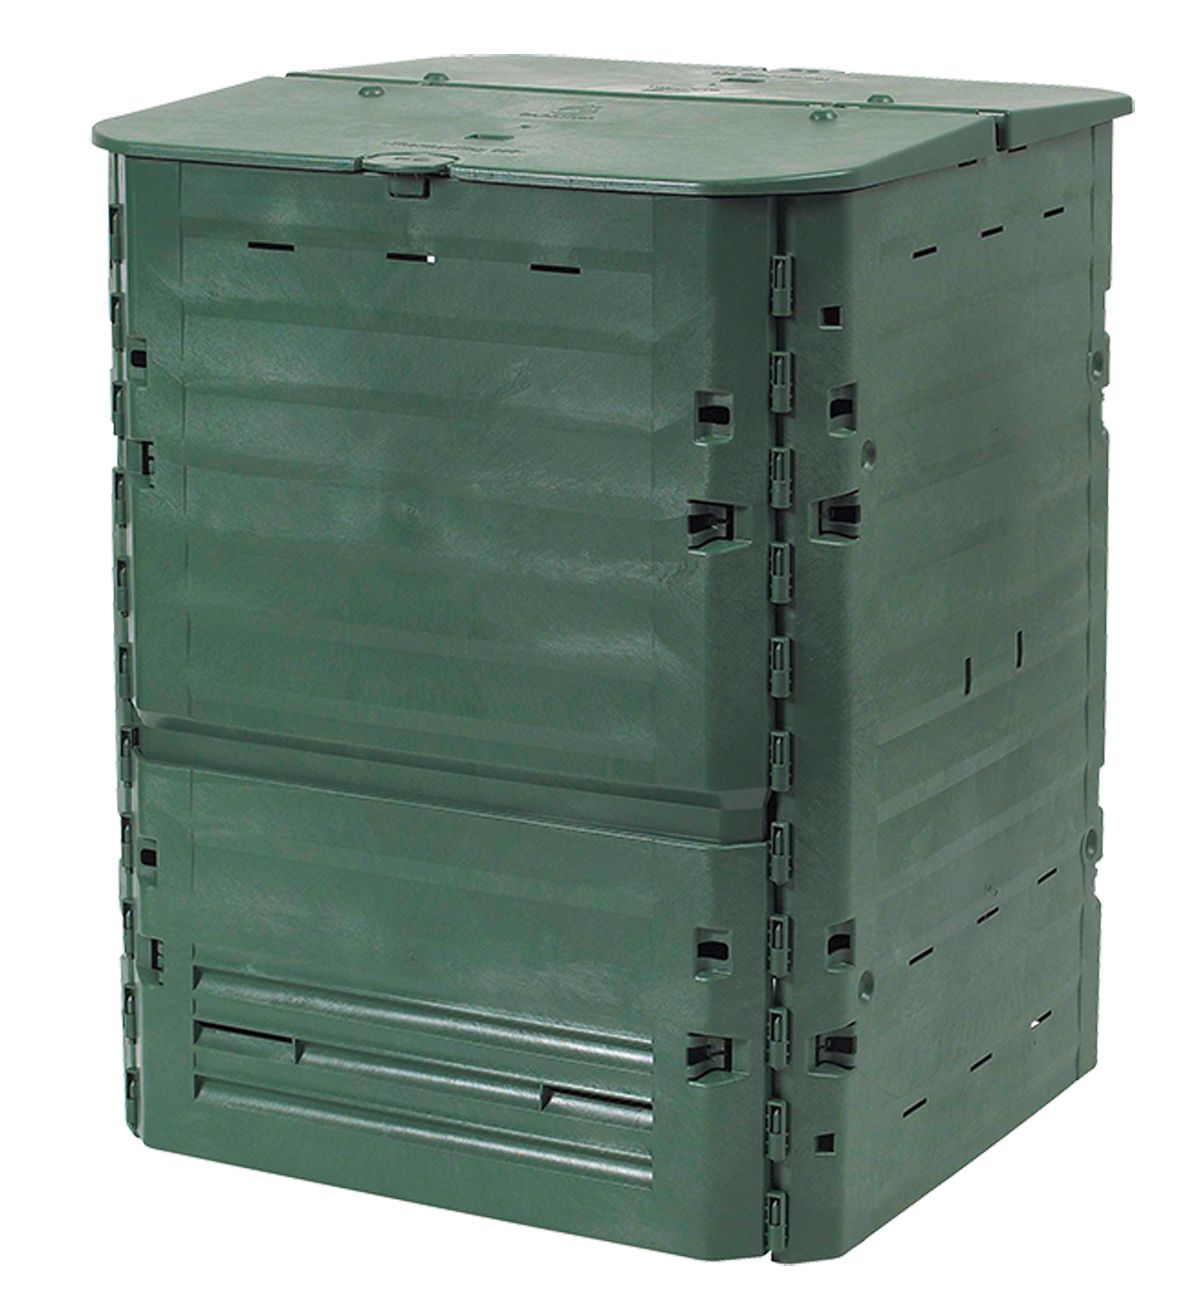 Tdi 626003 Large Thermo King Composter